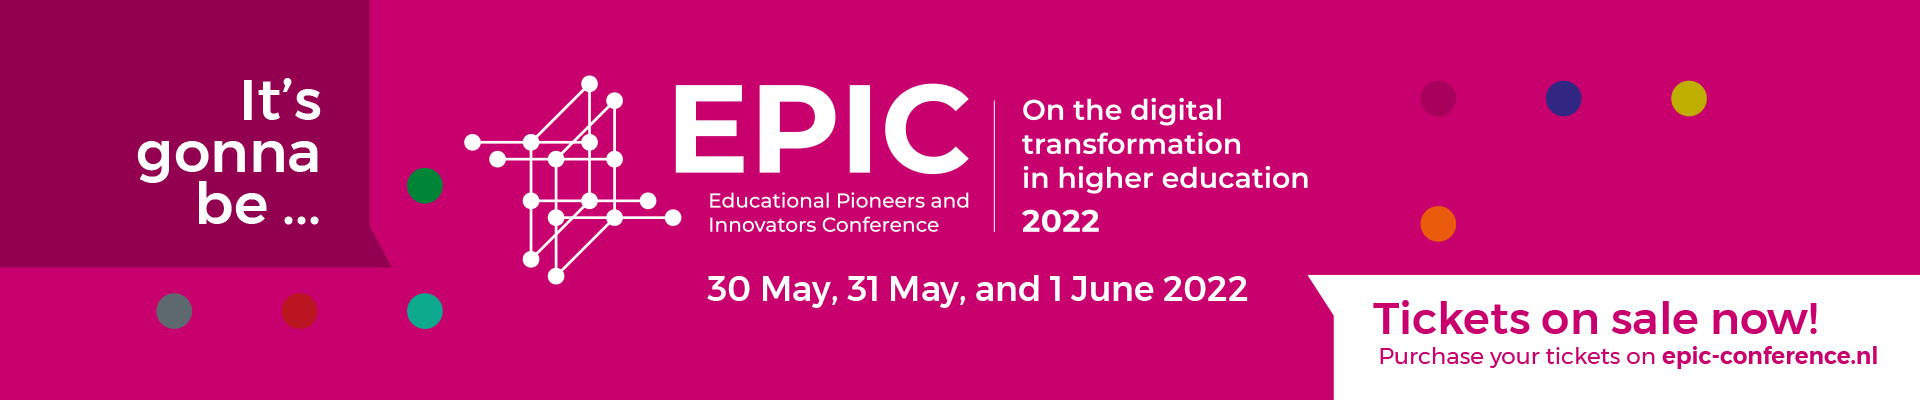 EPIC | Educational Pioneers and Innovators Conference 2022